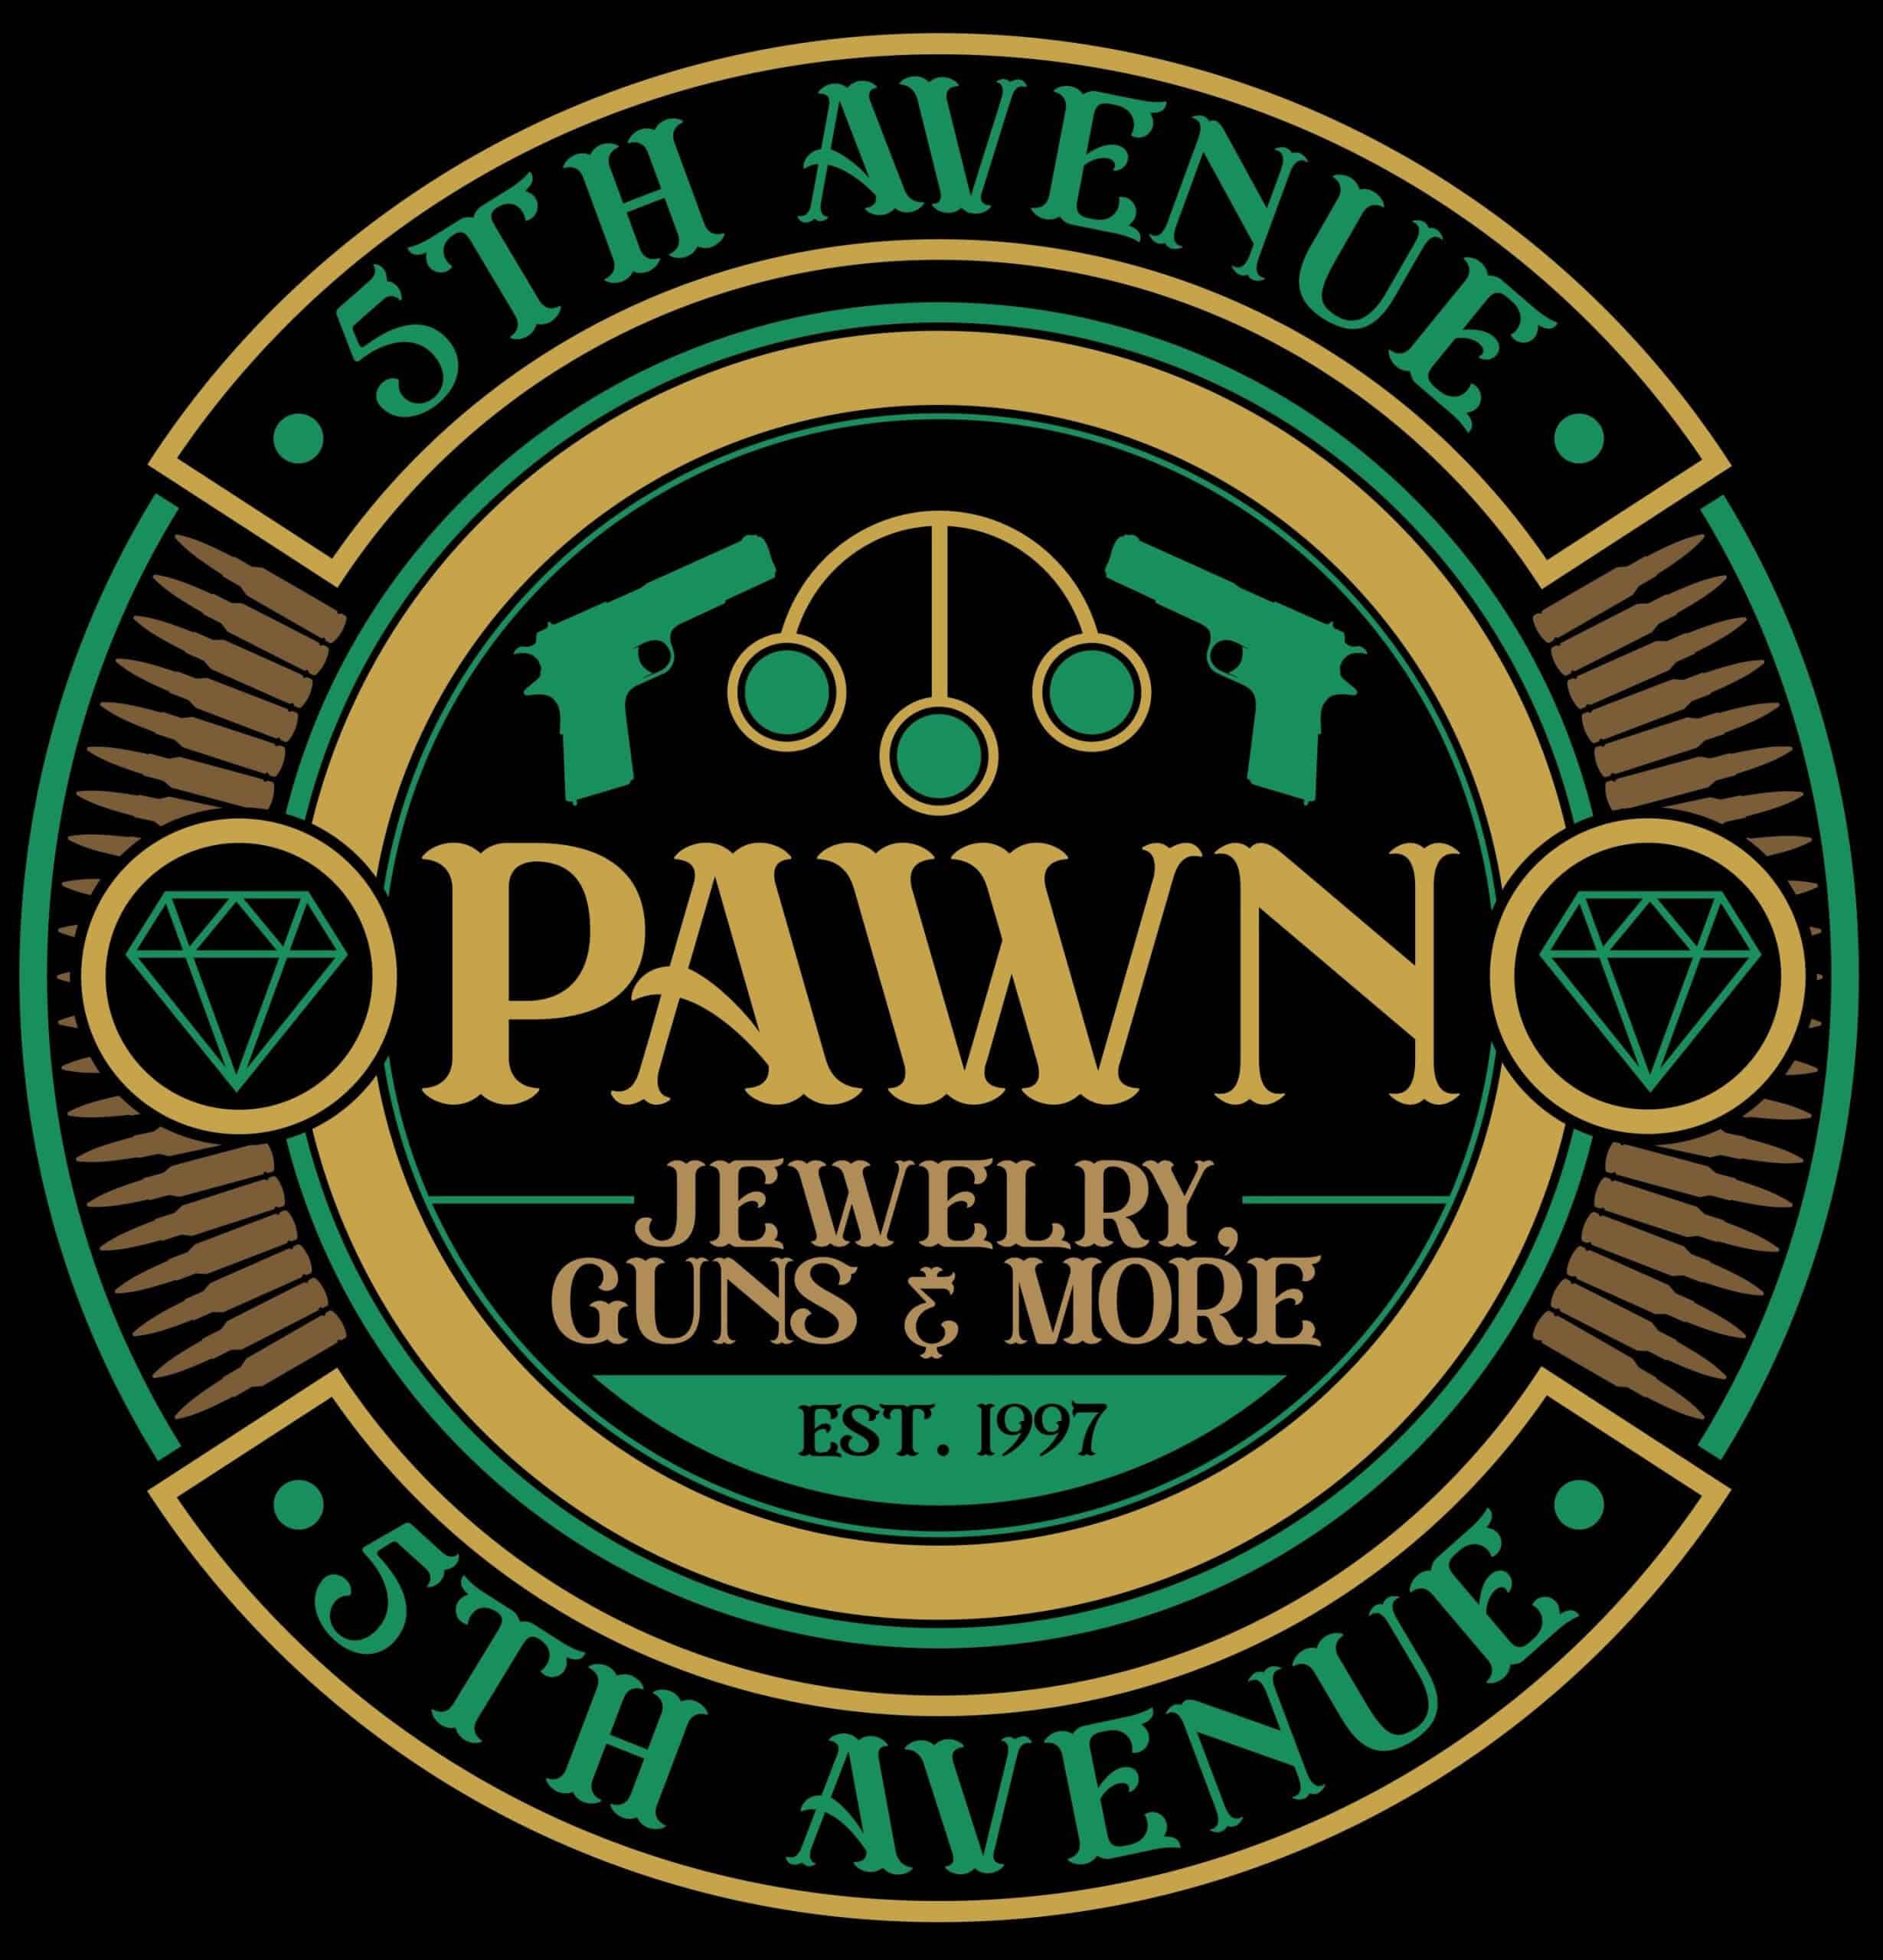 5th Ave Pawn